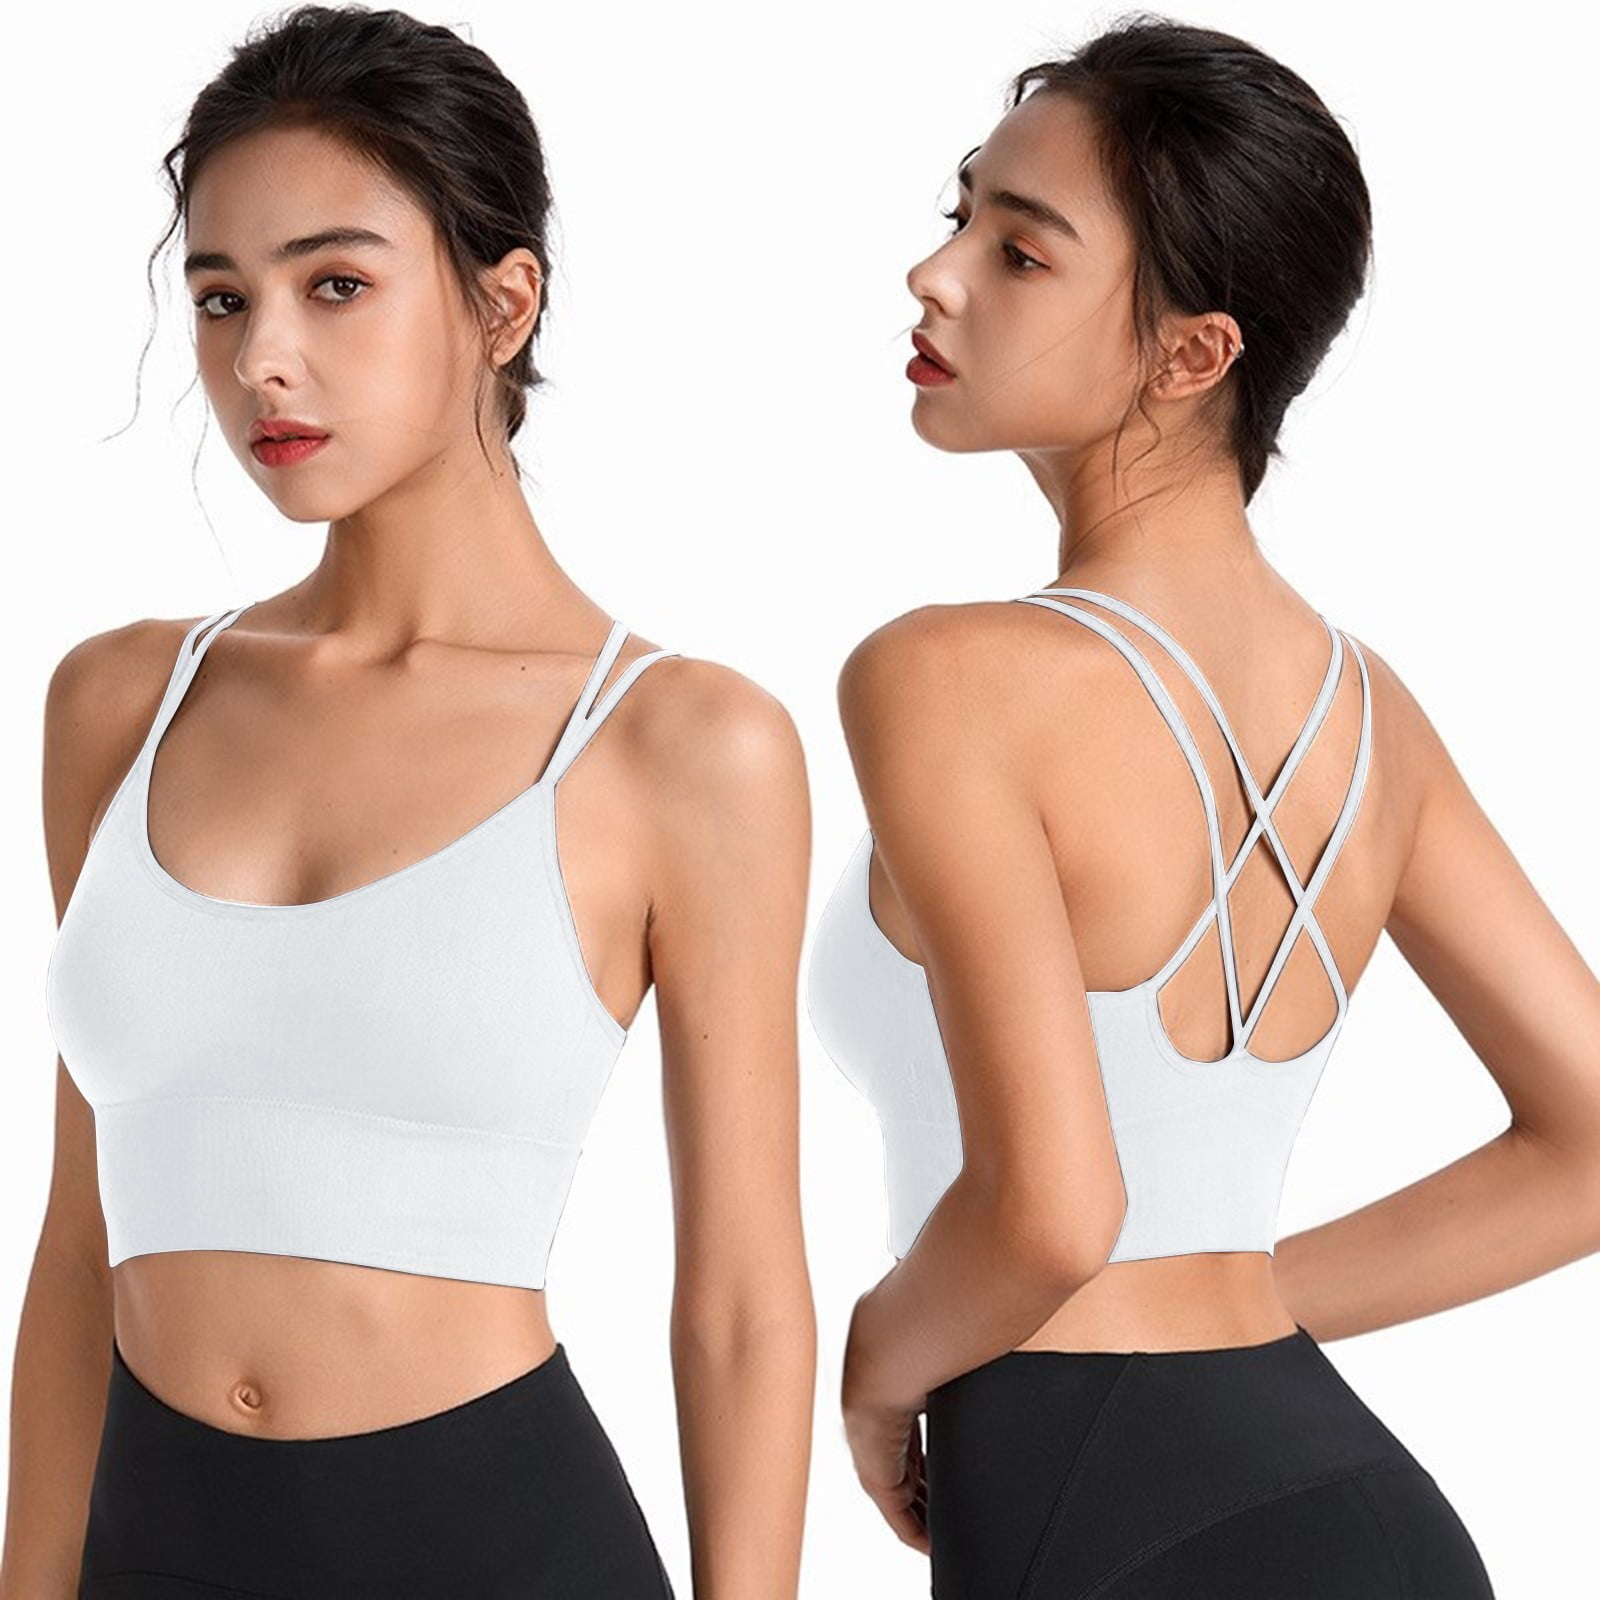 CAICJ98 Sports Bras For Women High Impact Sports Bras for Women, Criss-Cross  Back Padded Strappy Sports Bras Workout Top Black,L 